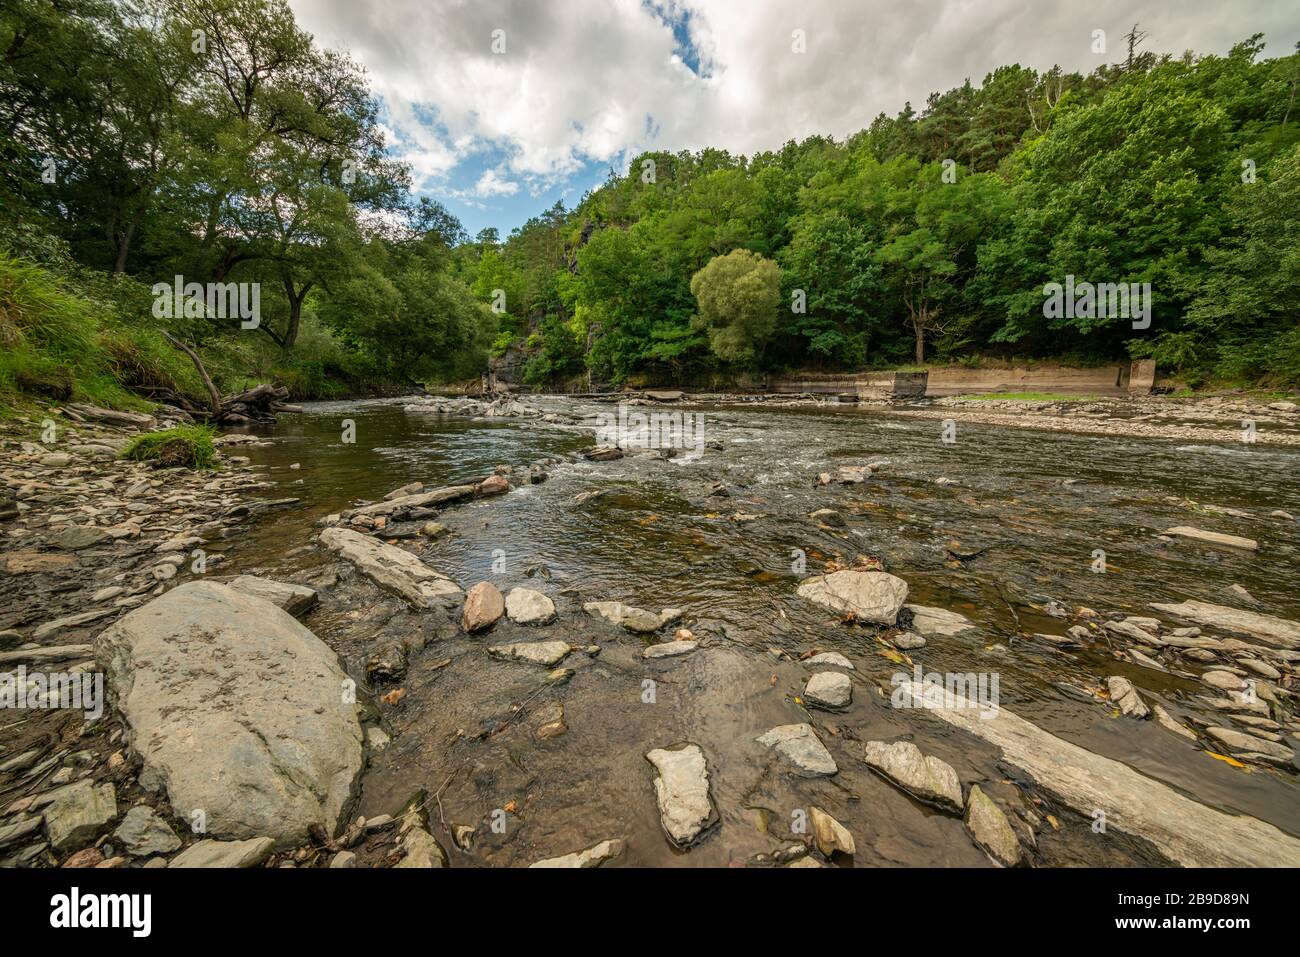 river with low water level showing rocky bottom in forests, landscape Stock Photo